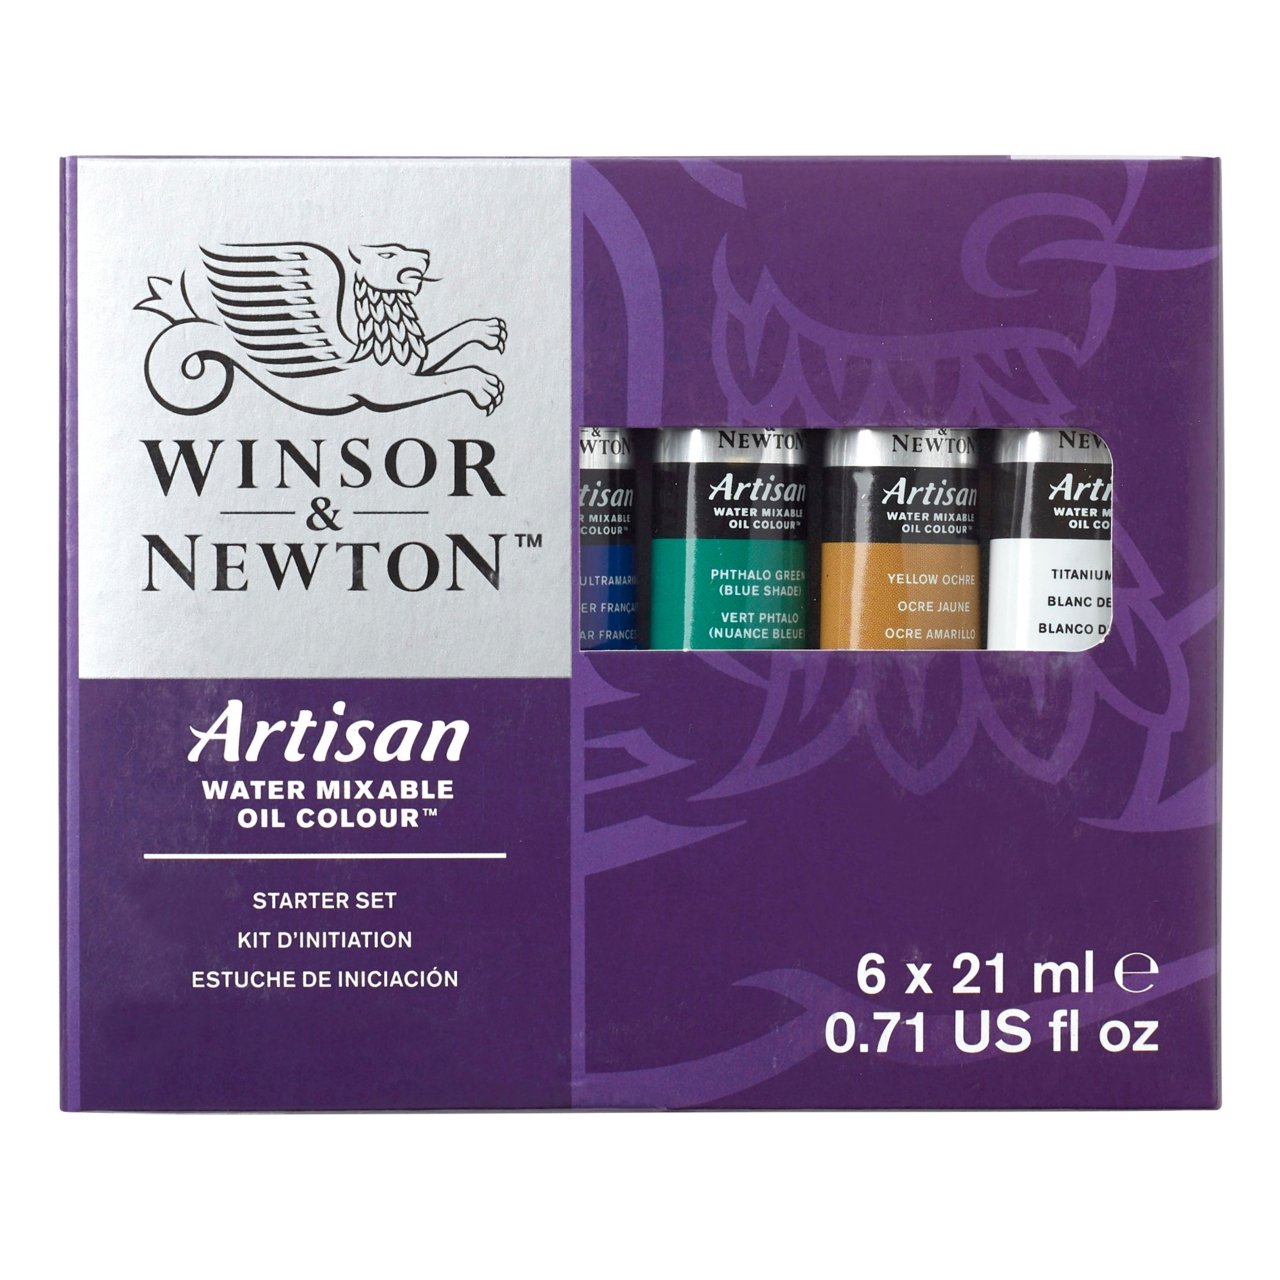 Winsor & Newton Artisan water mixable oil color starter set of 6 X 21 ml tubes - merriartist.com